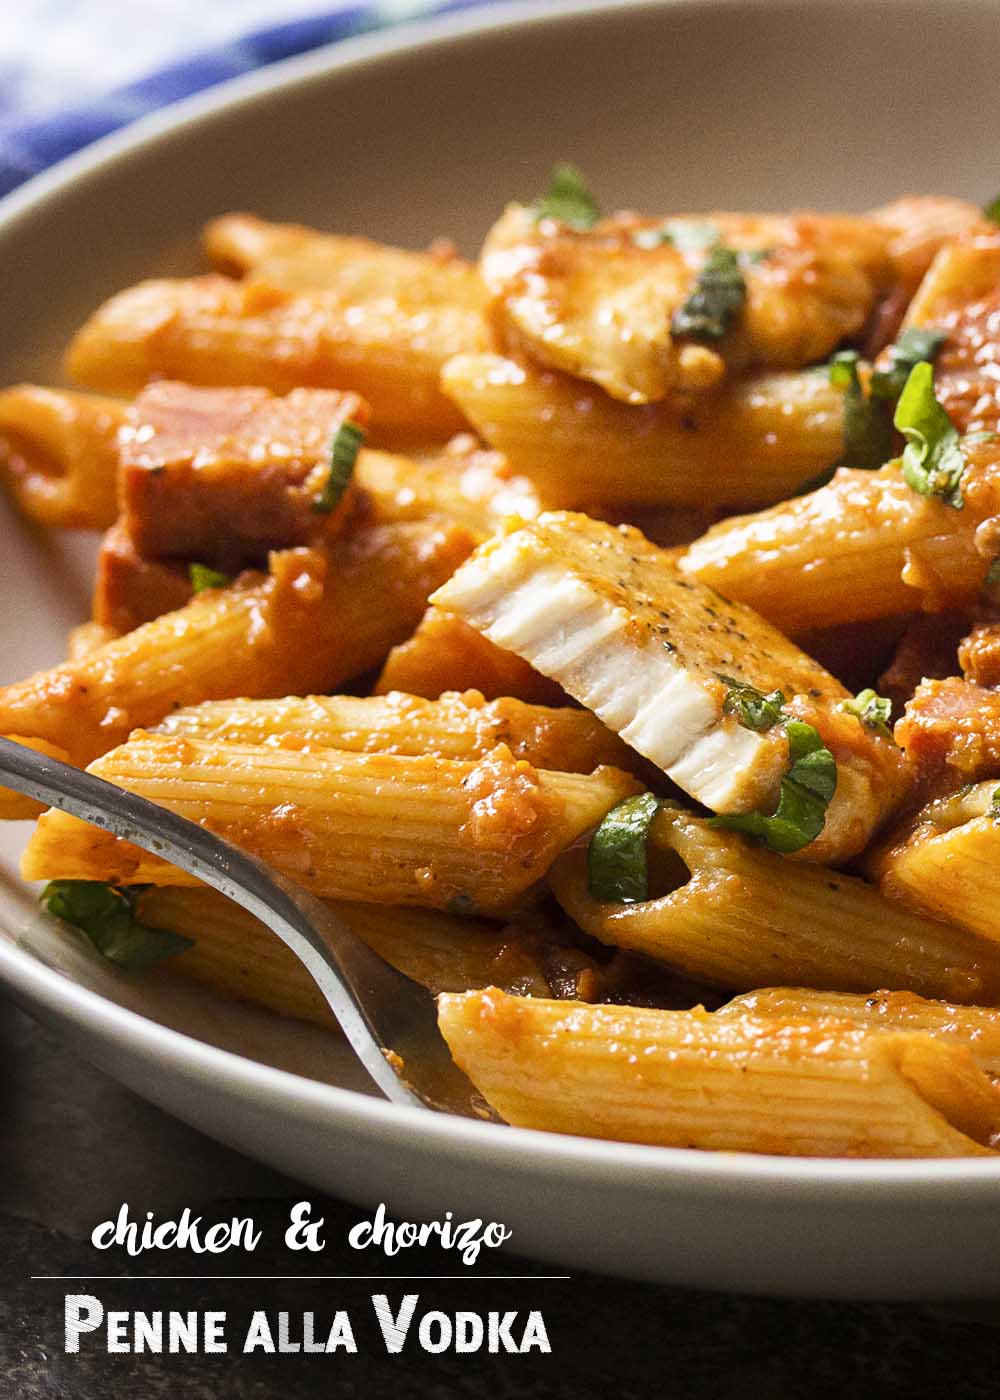 My penne alla vodka is creamy and full of deep tomato flavor from homemade marinara along with plenty of seared chicken and chorizo sausage. Easy weeknight meal! | justalittlebitofbacon.com